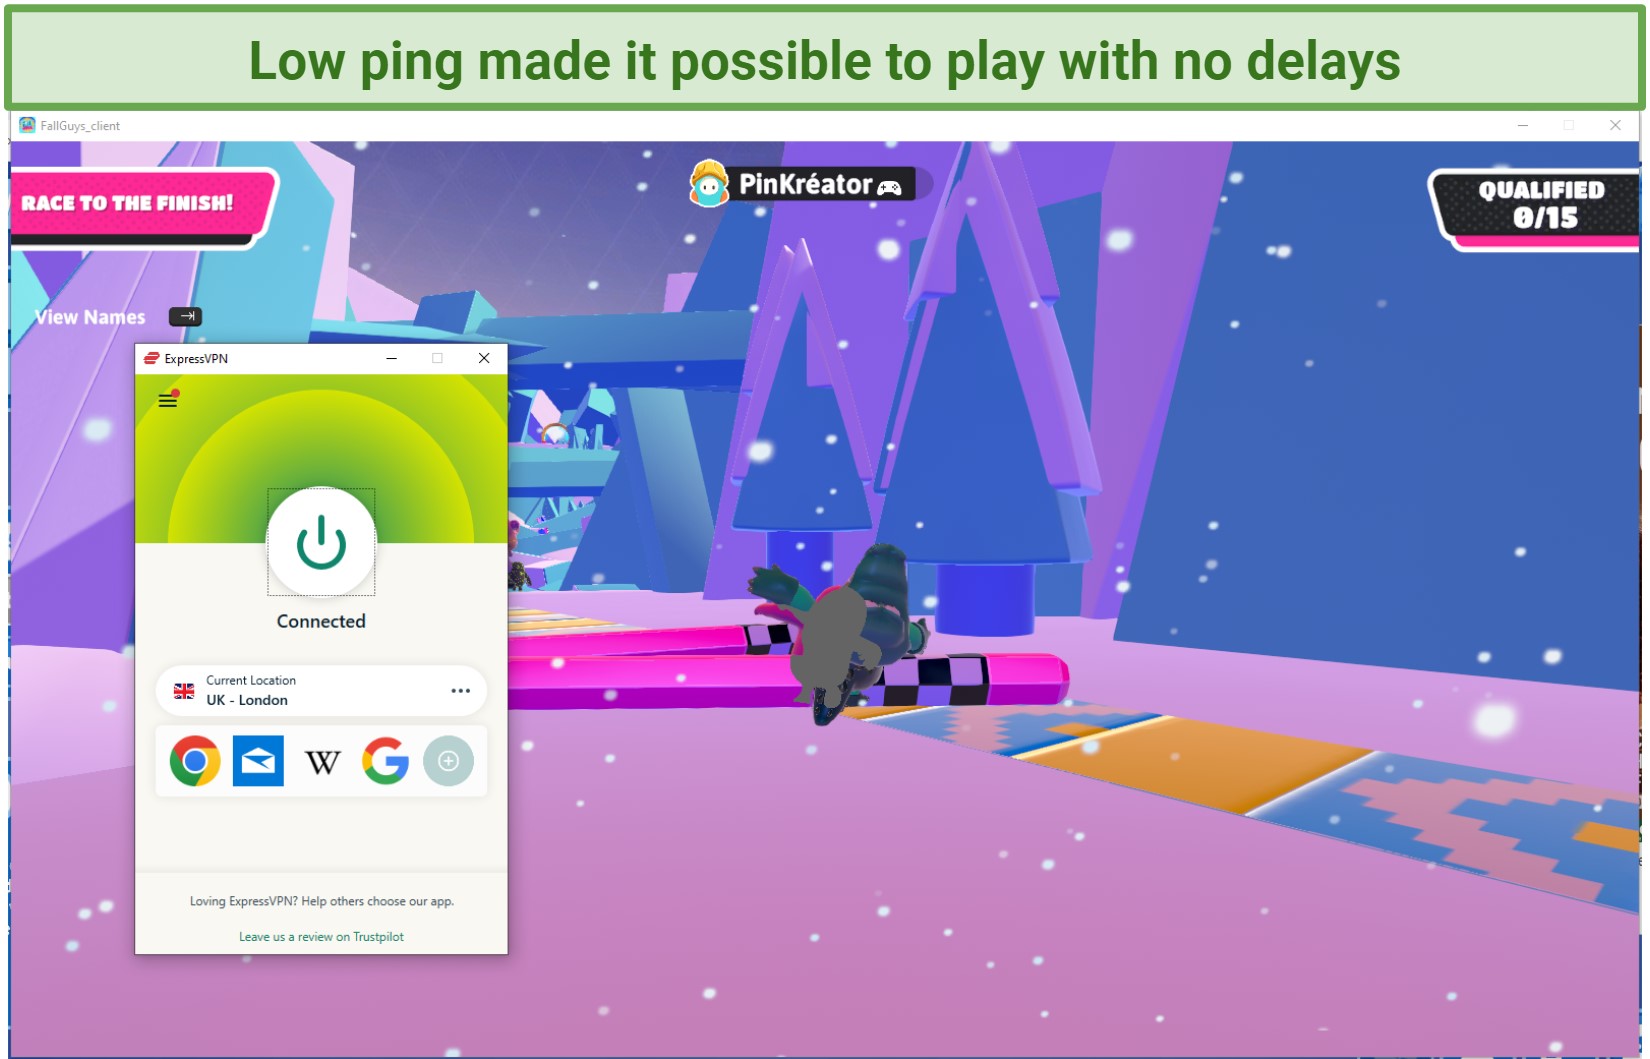 Screenshot of the game PinKreator, with the ExpressVPN app connected to a UK server.